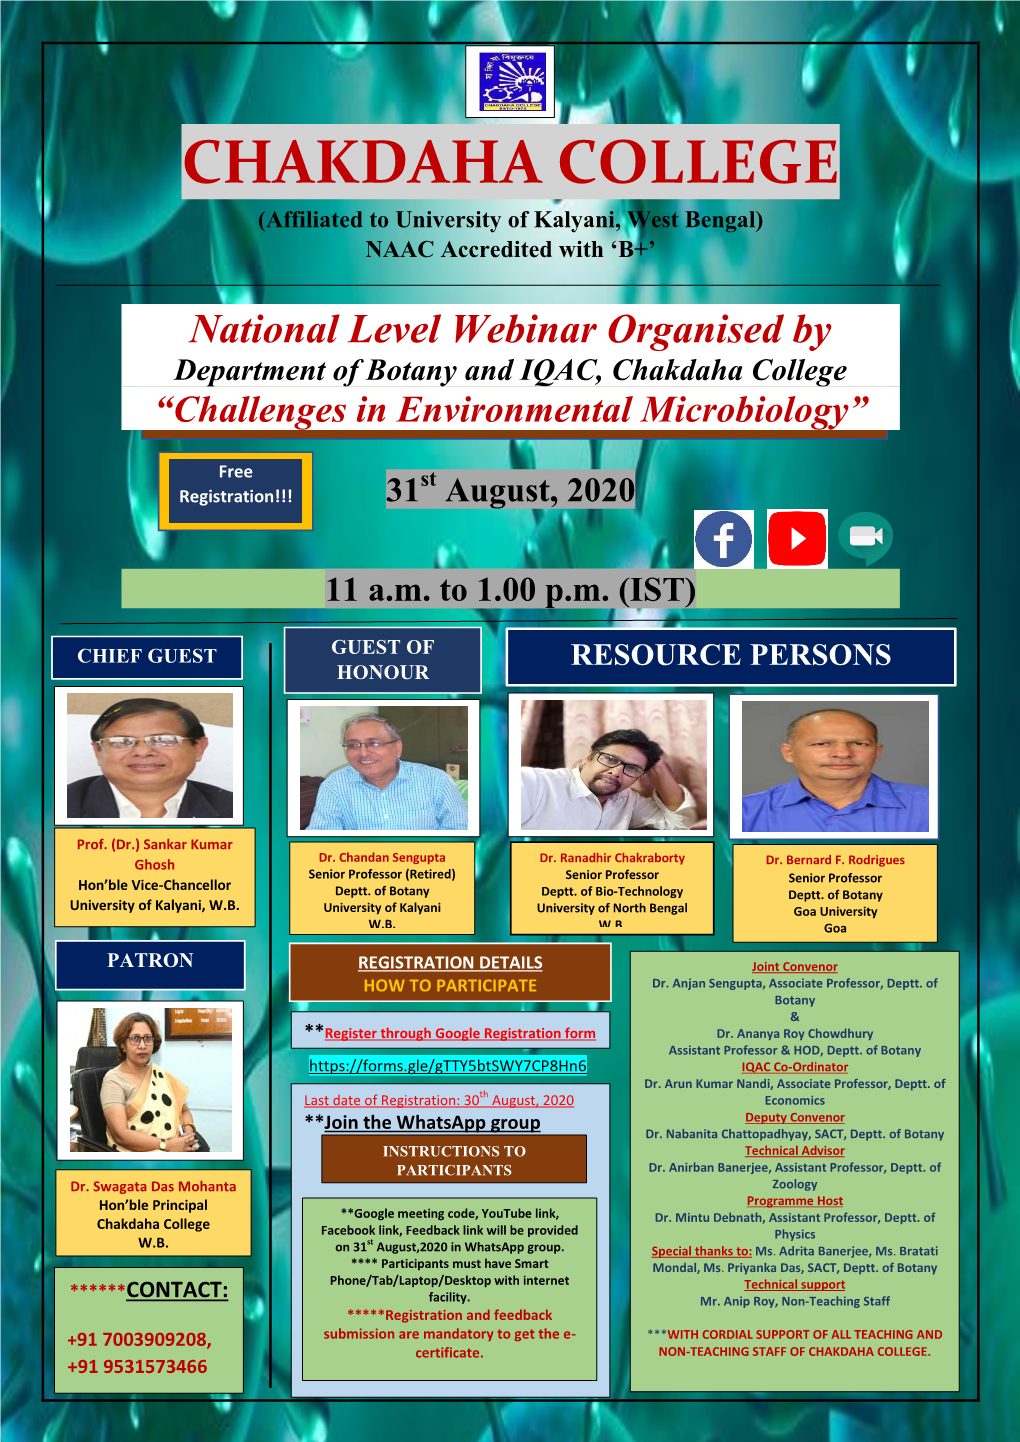 National Level Webinar Organised by Department of Botany and IQAC, Chakdaha College “Challenges in Environmental Microbiology”